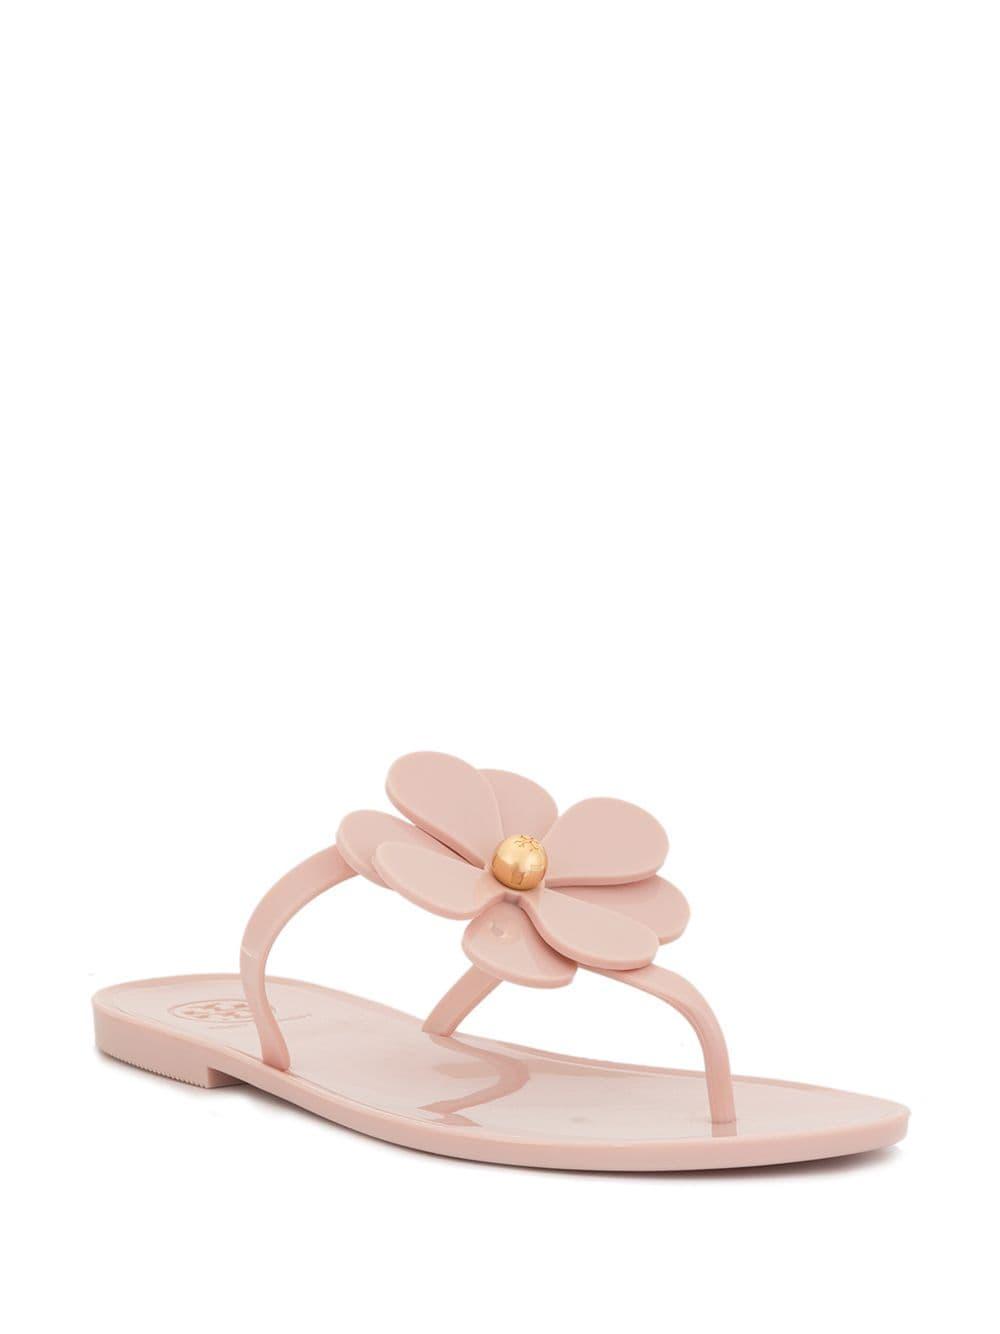 The prettiest sandals for summer!! #pink #haul #fypシ #girly, tory burch  sandal